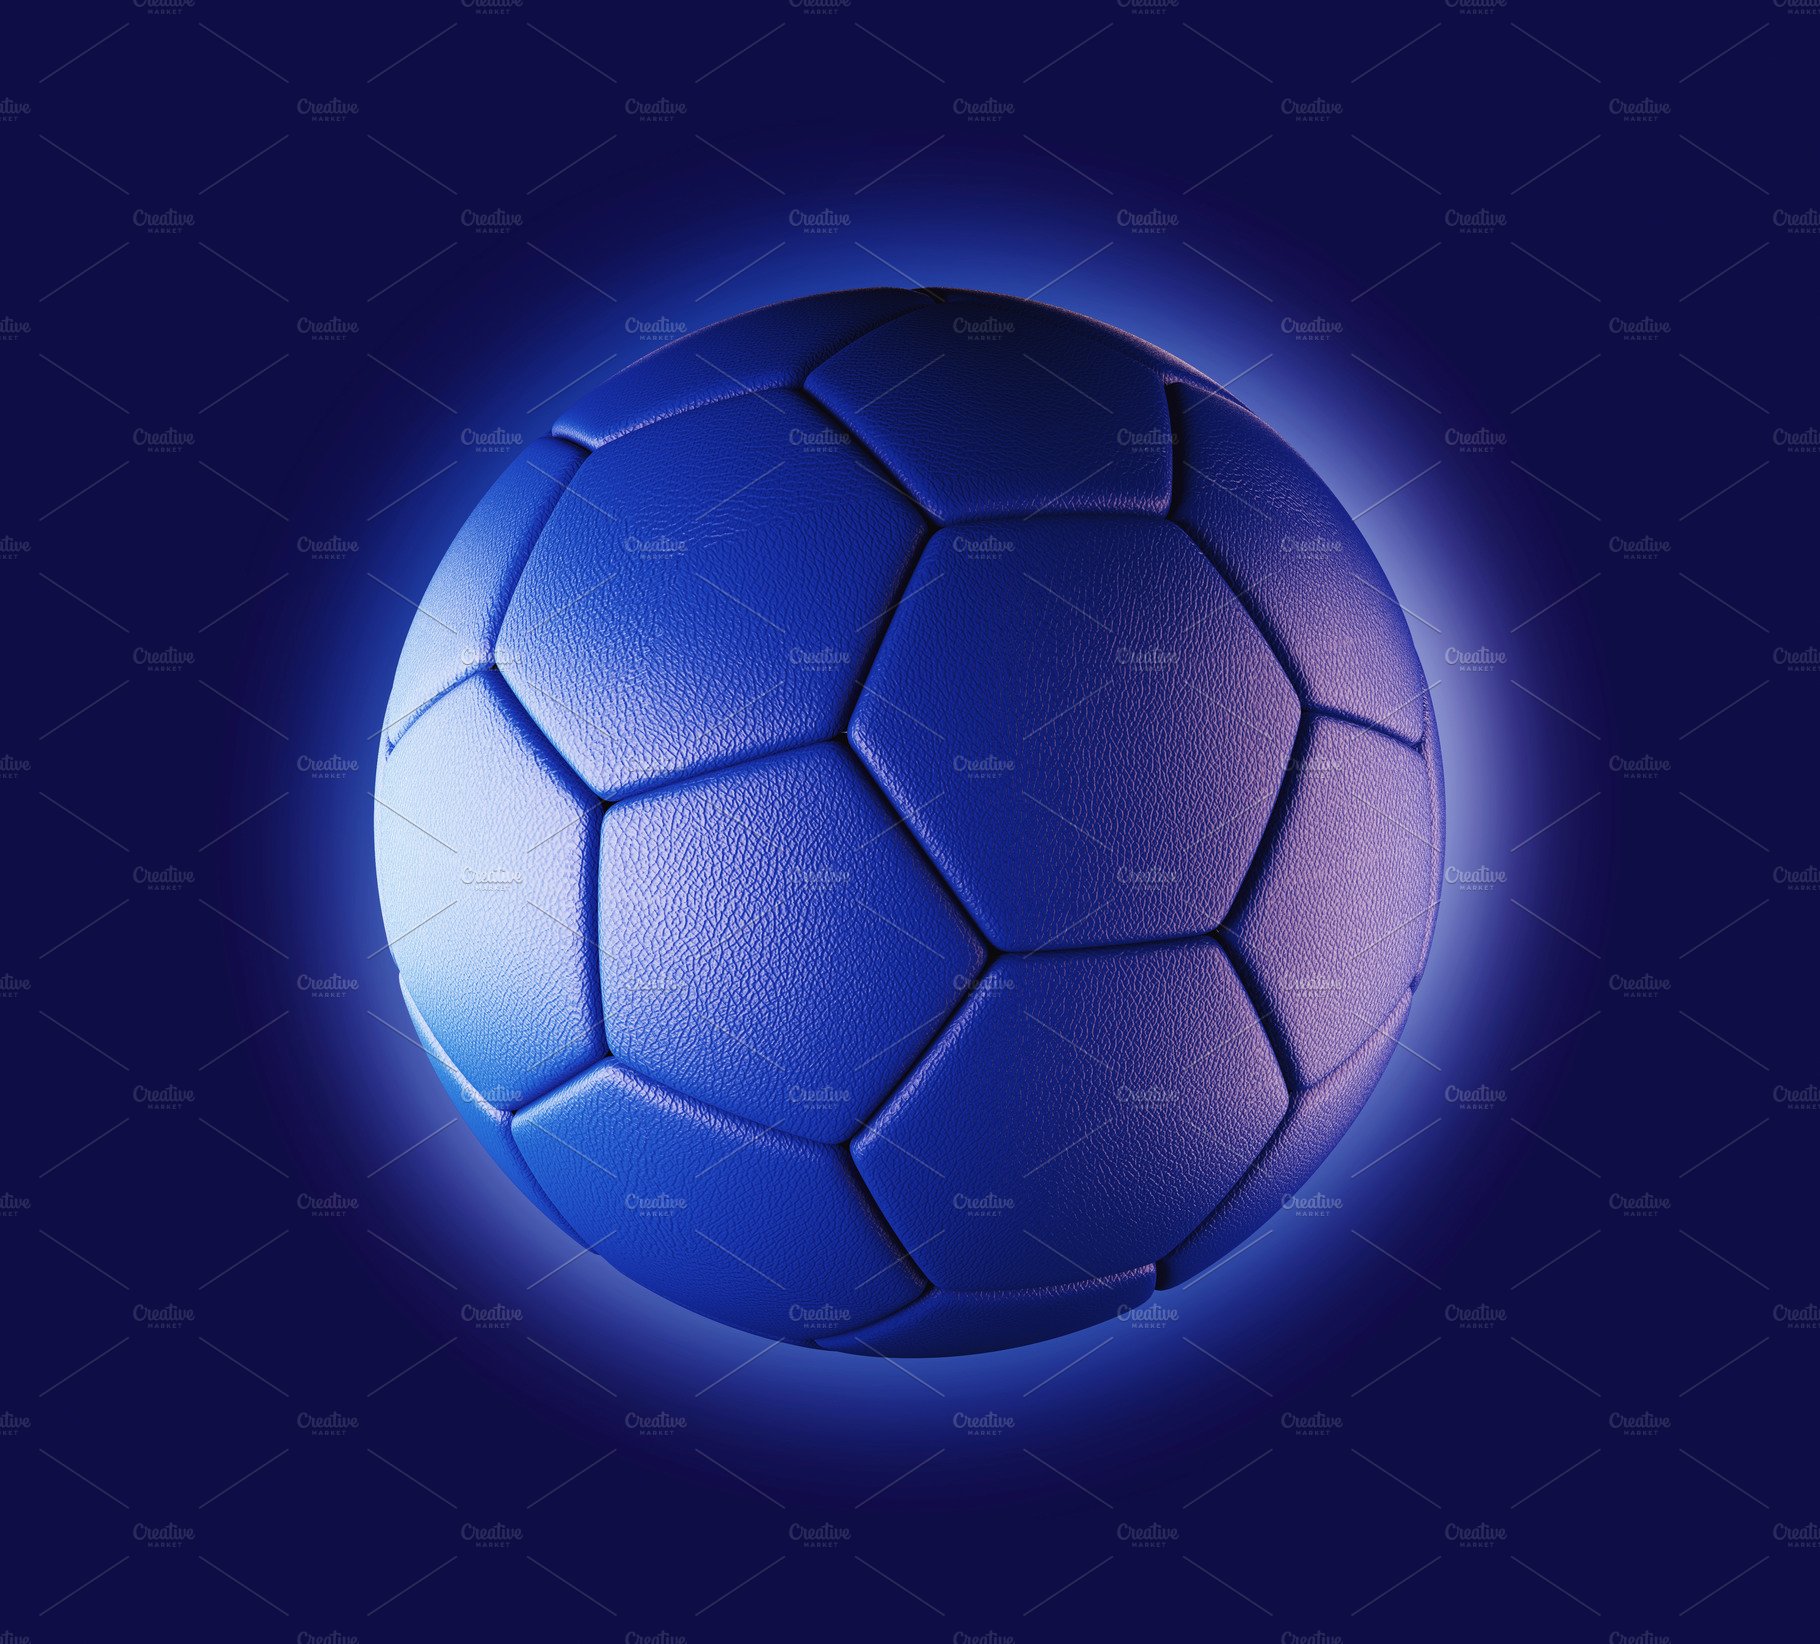 Blue soccer ball on blue background in technology concept. 3d illustration cover image.